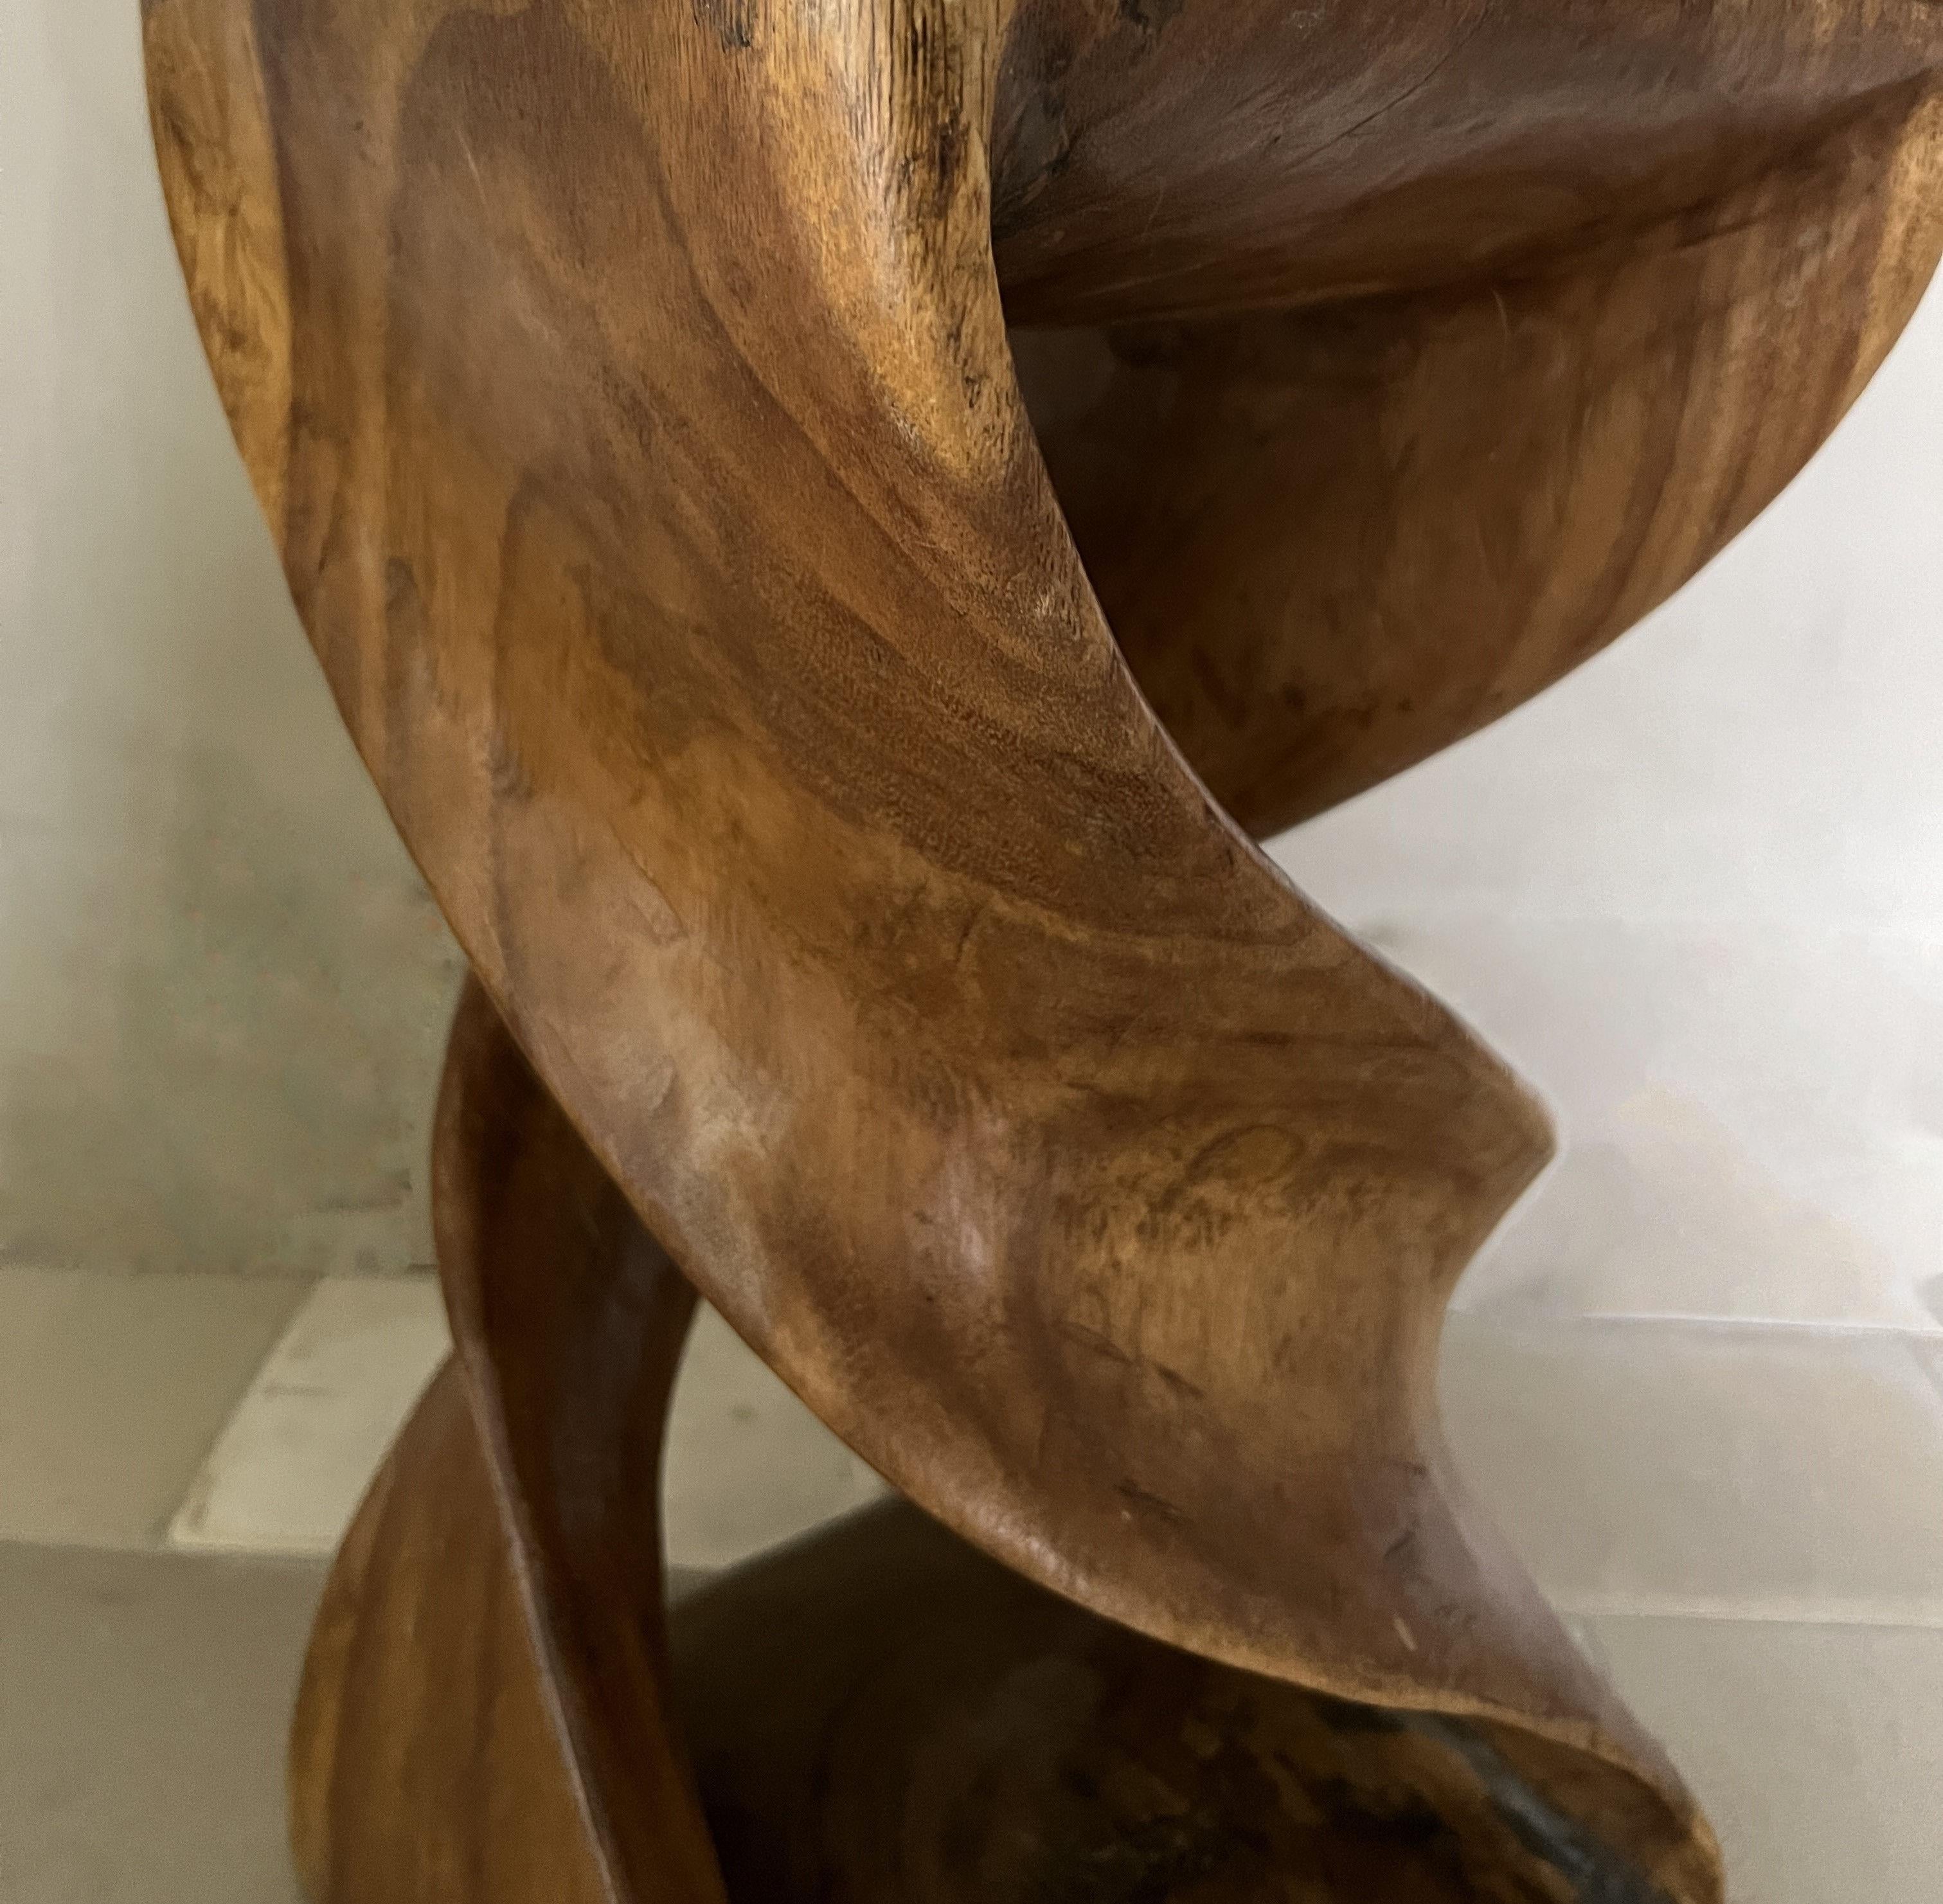 Brazilian Midcentury handsculpted spiral stool sidetable in solid wood